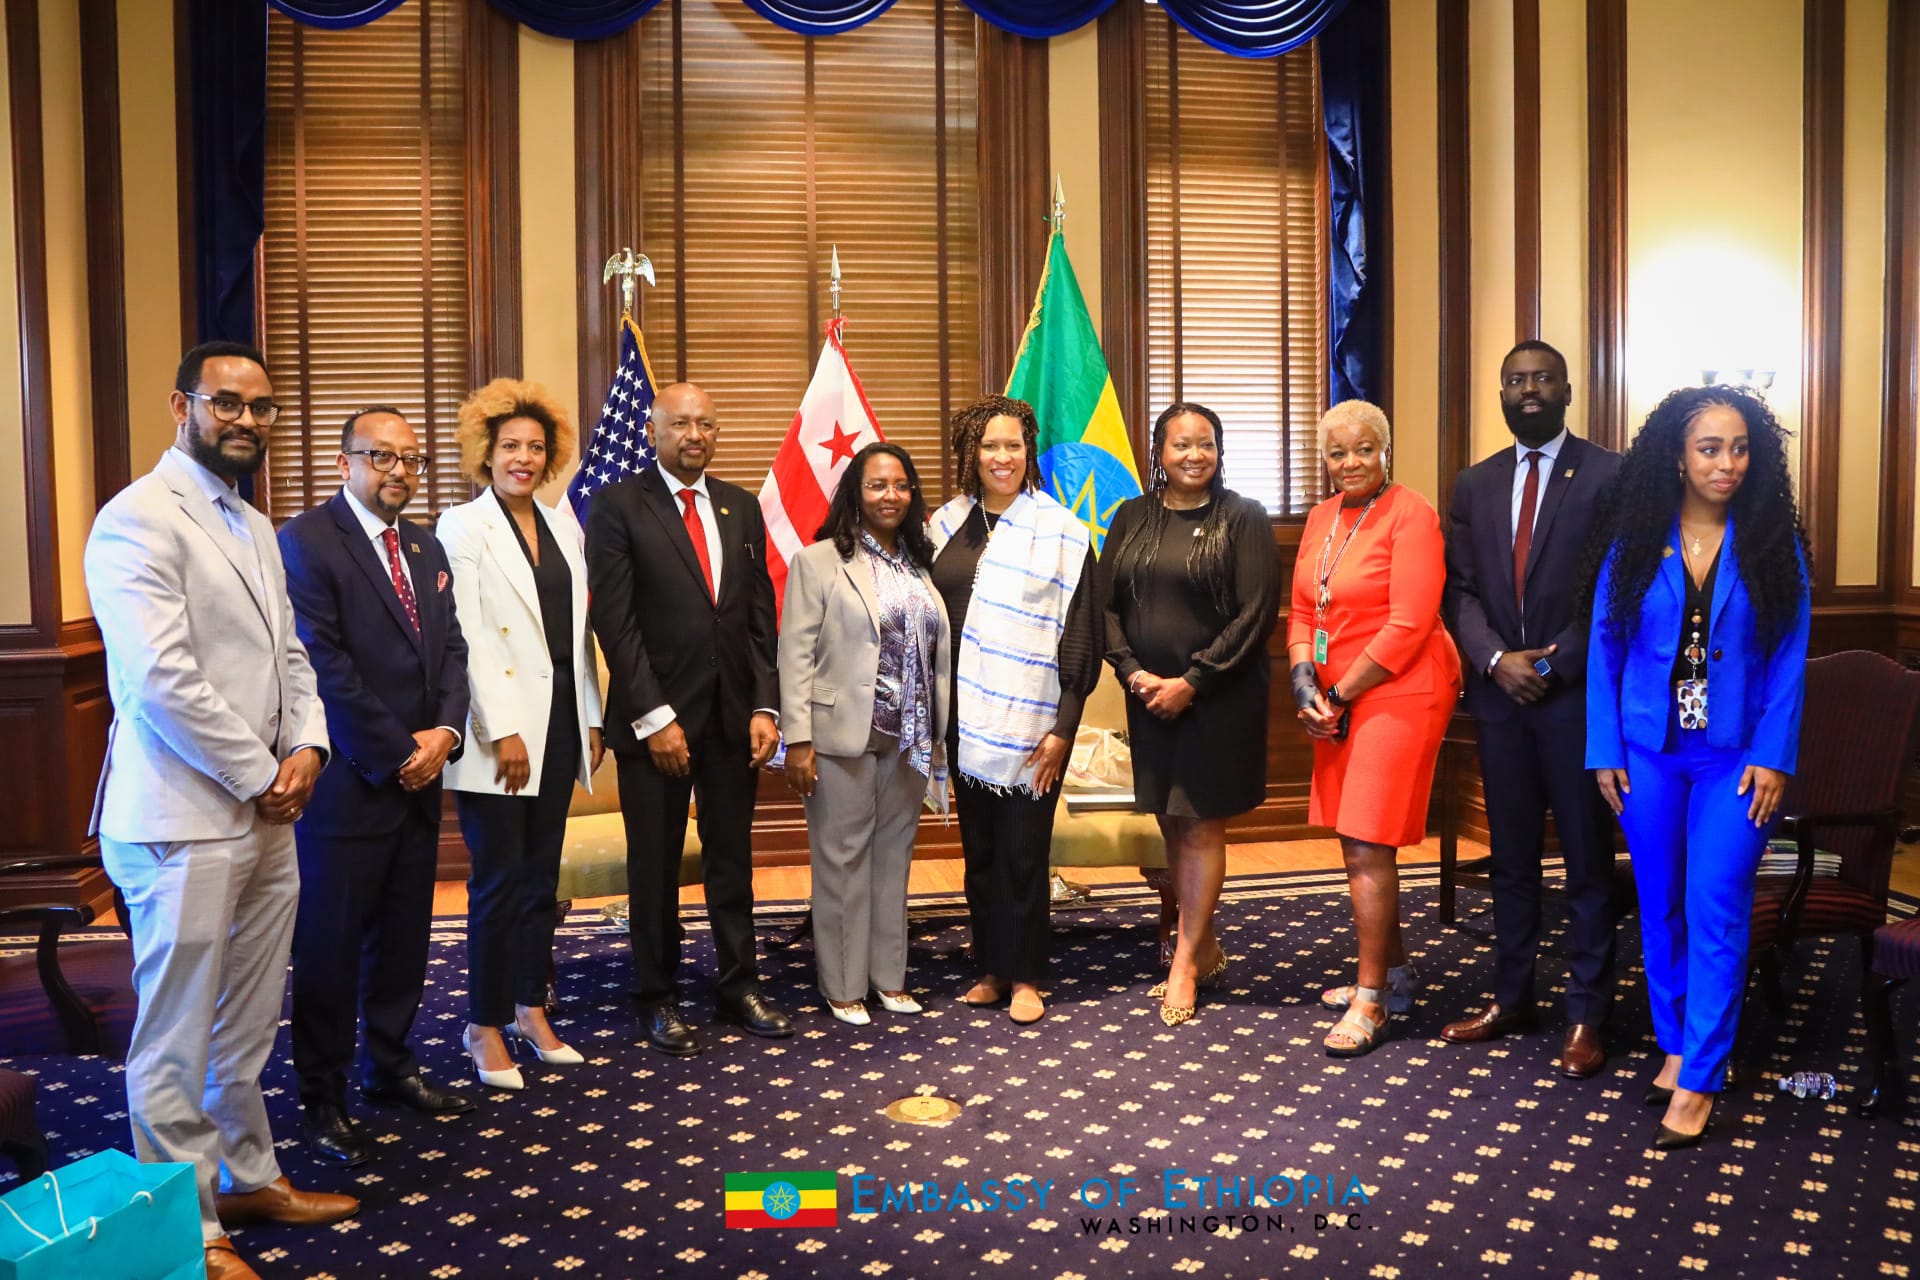 Mayors Of Addis Ababa, Washington D.C, Discuss Implementation Of The Sister City Agreements.